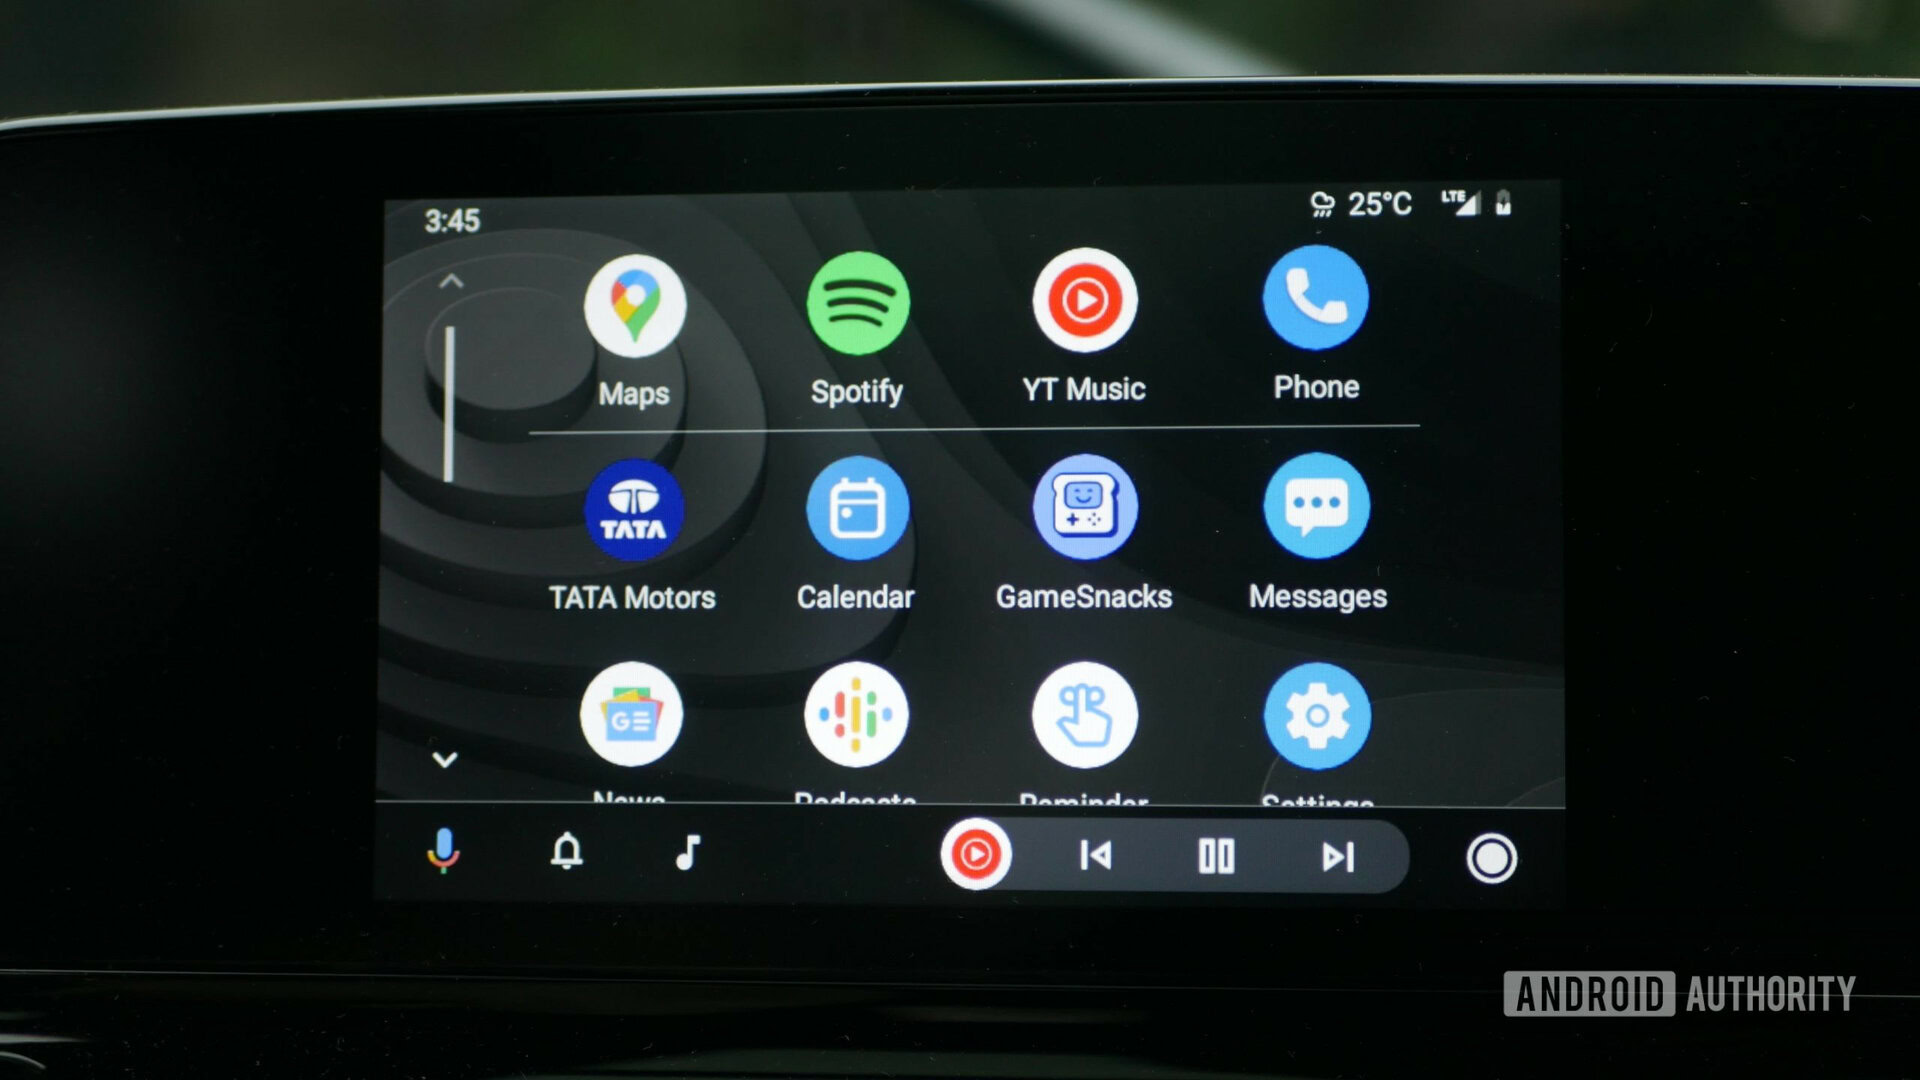 Google's new Android Auto interface works with any screen size